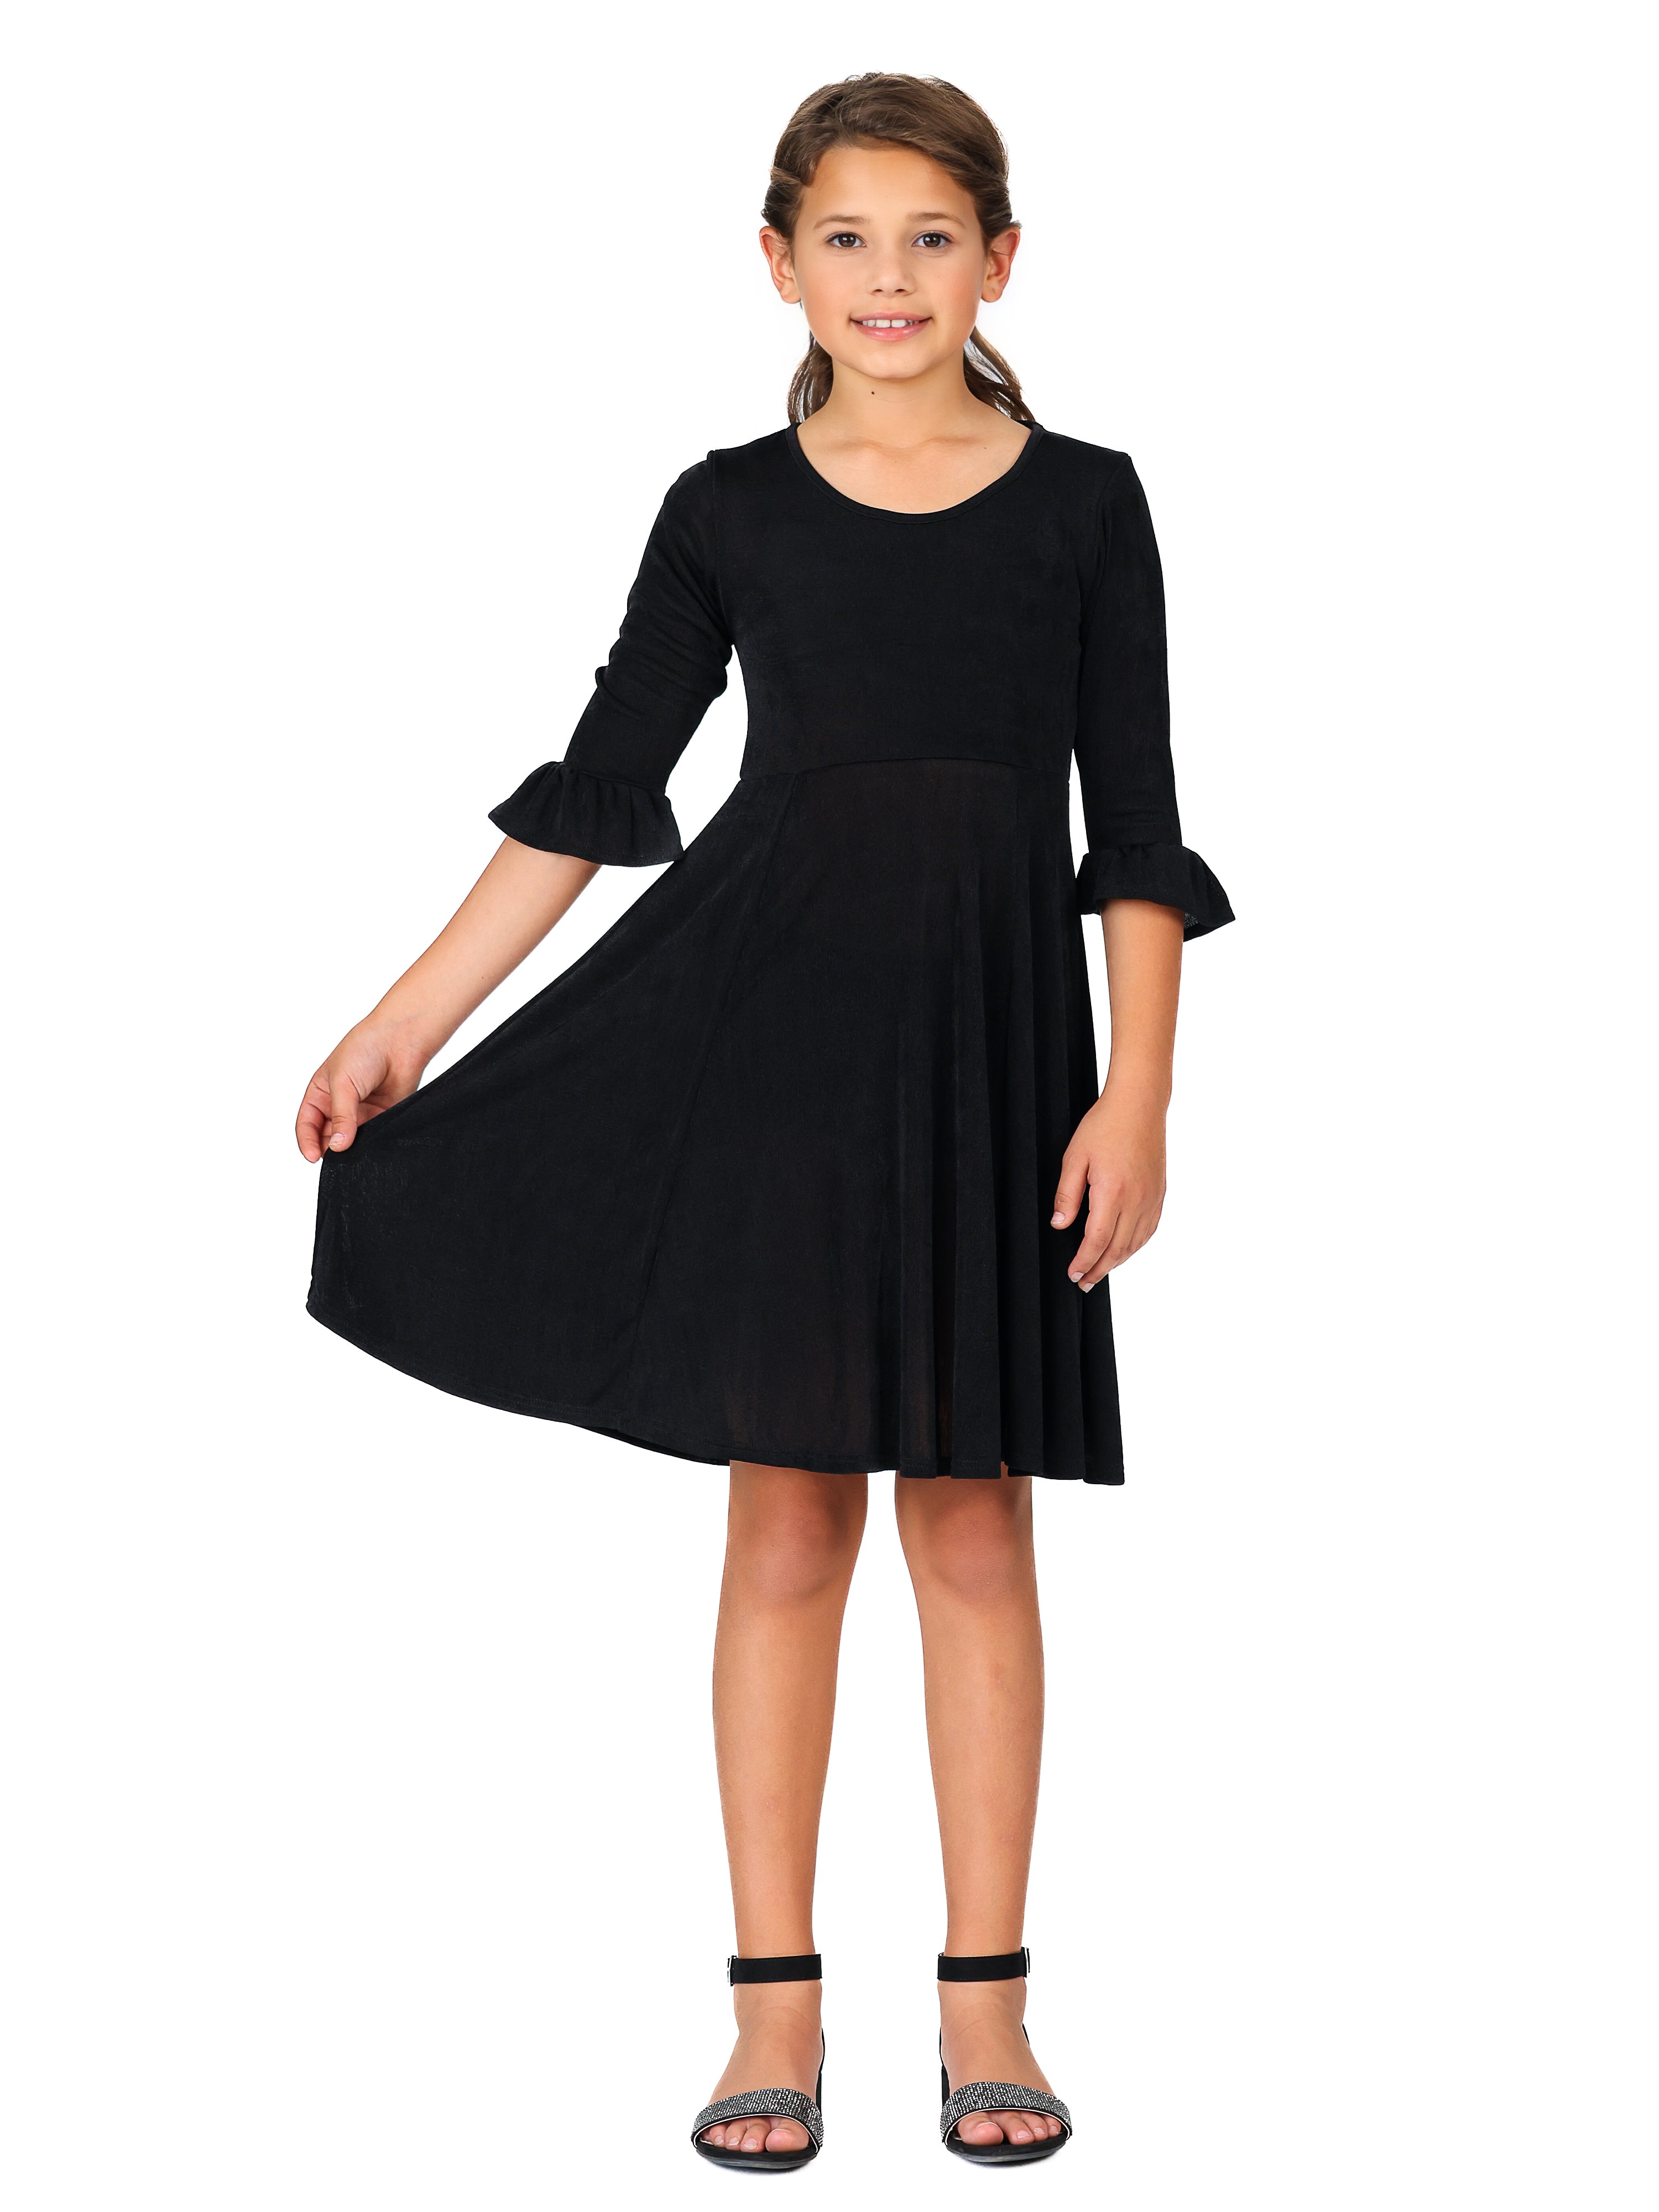 Girls Elbow Length Sleeve Fit and Flare Party Dress